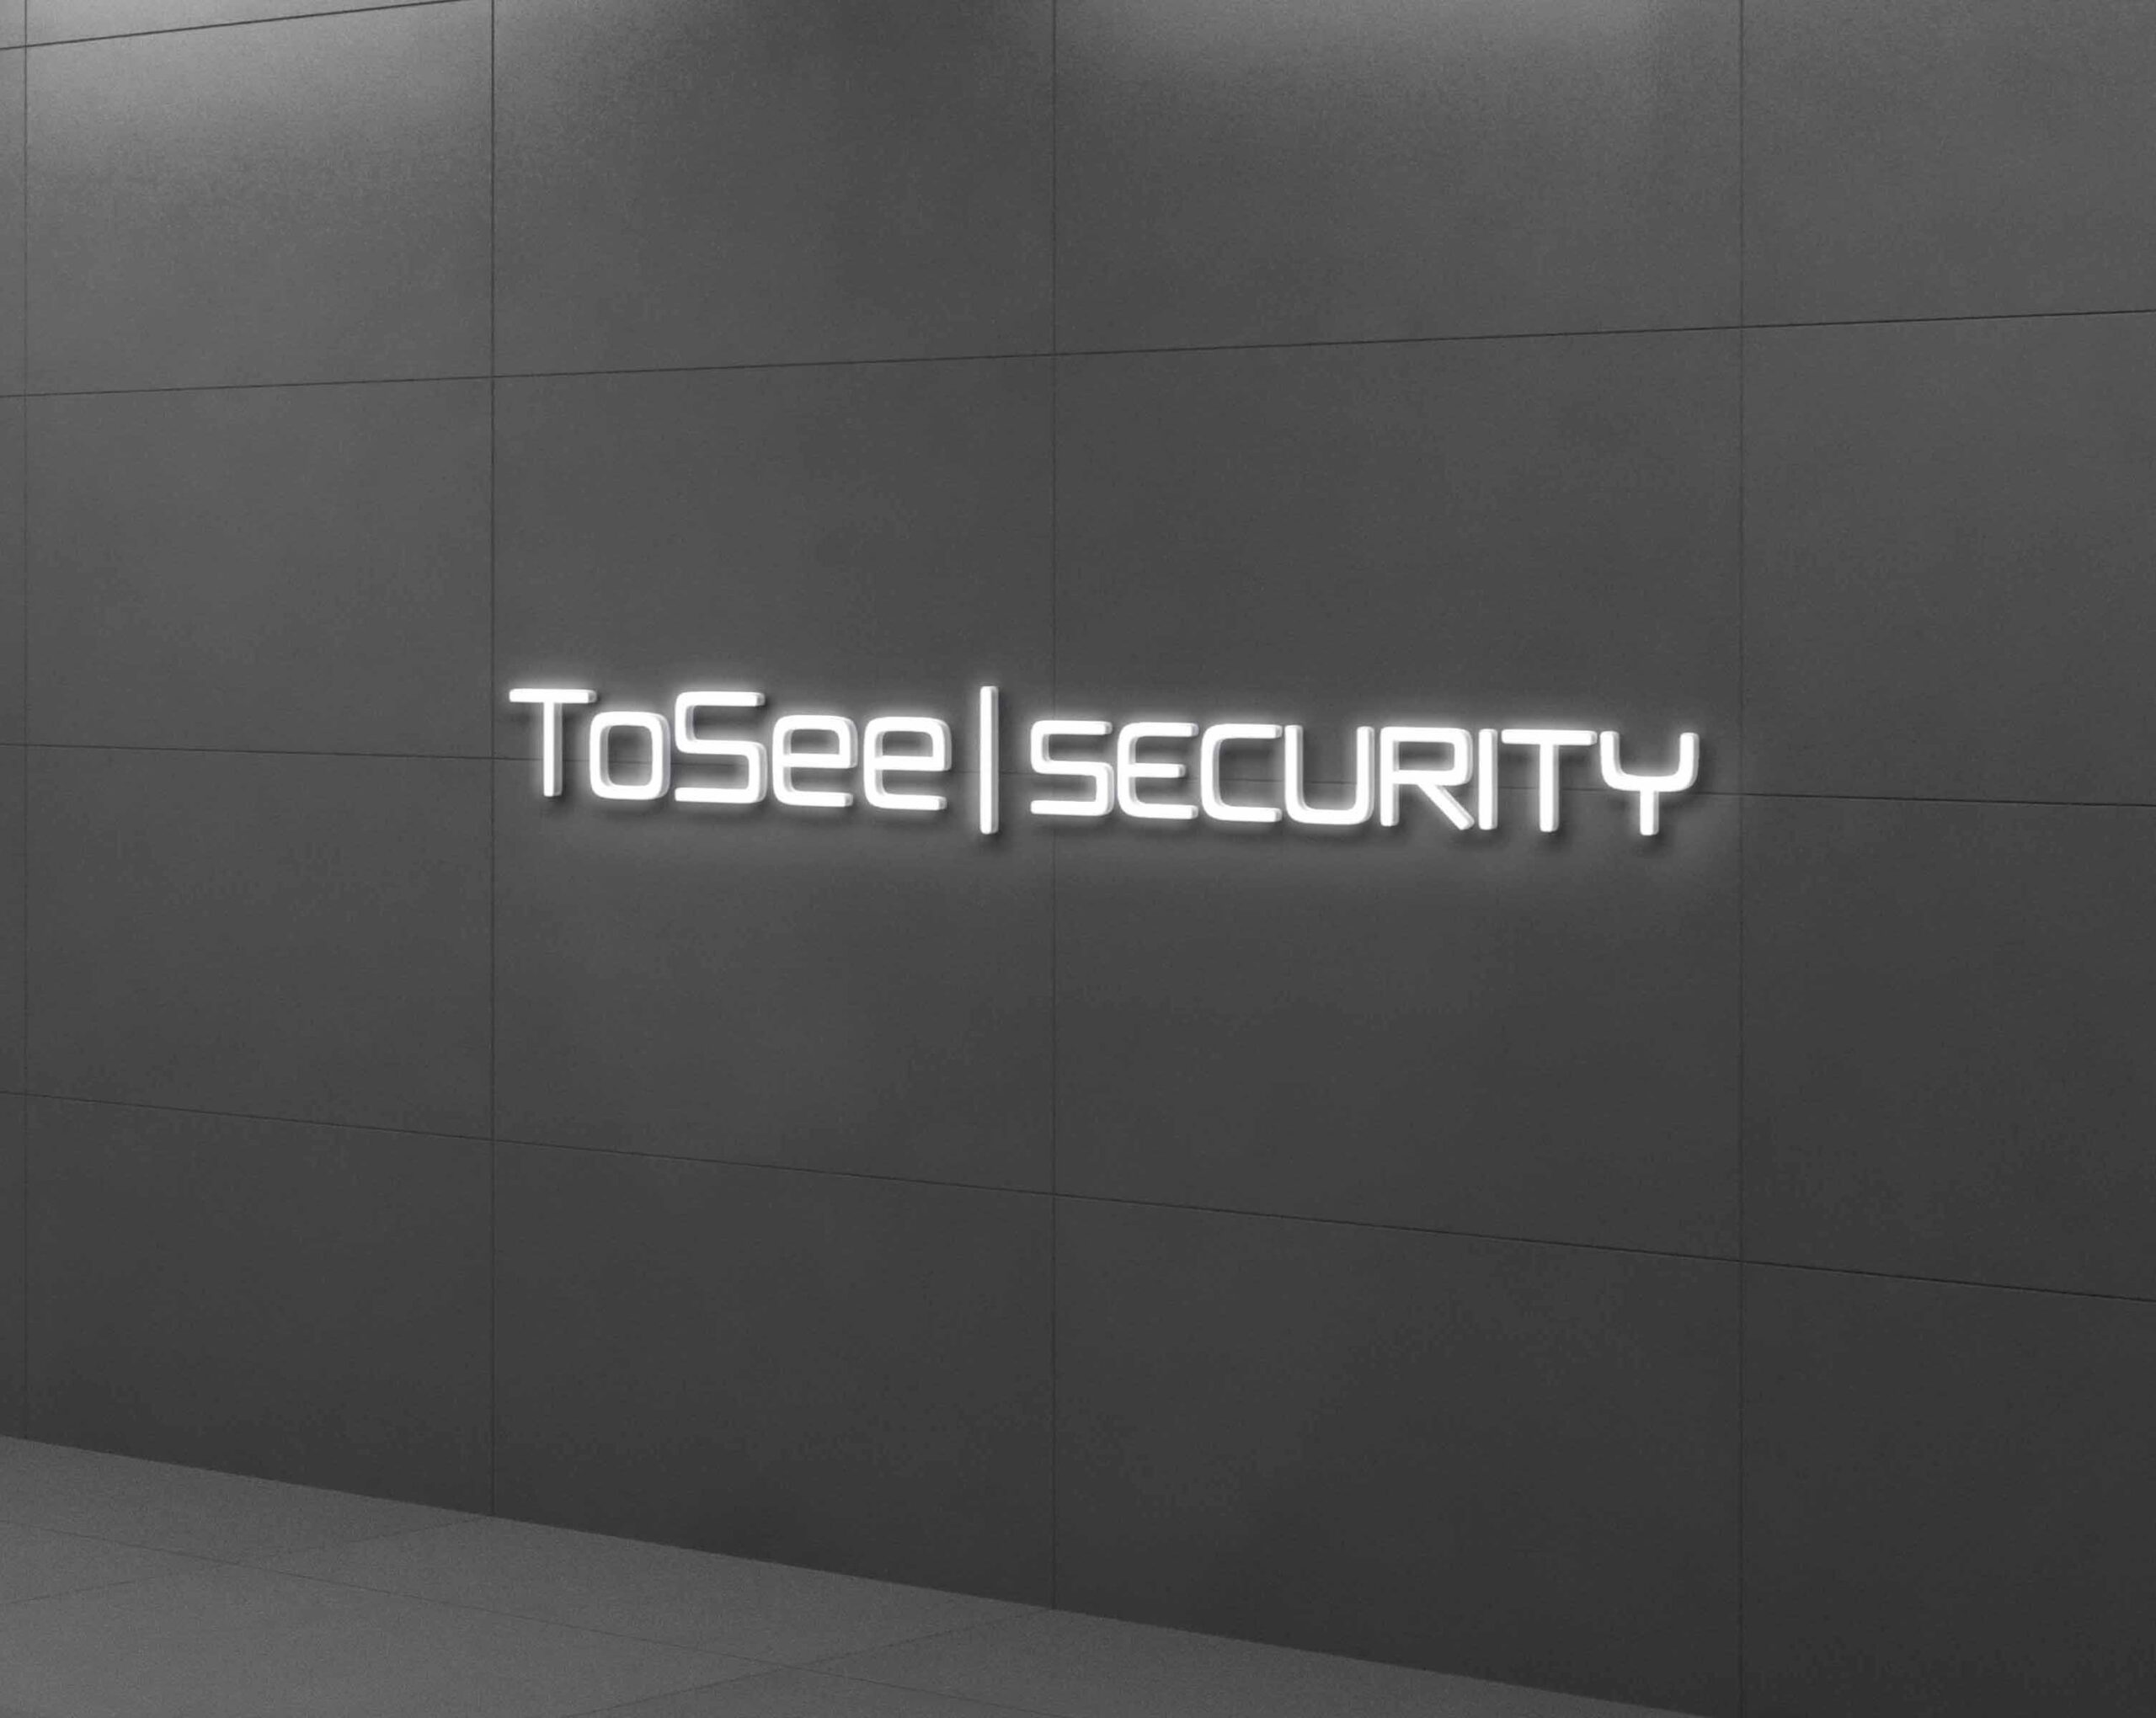 TOSEESECURITY – LOGO MOCKUP – FEATURED IMAGE